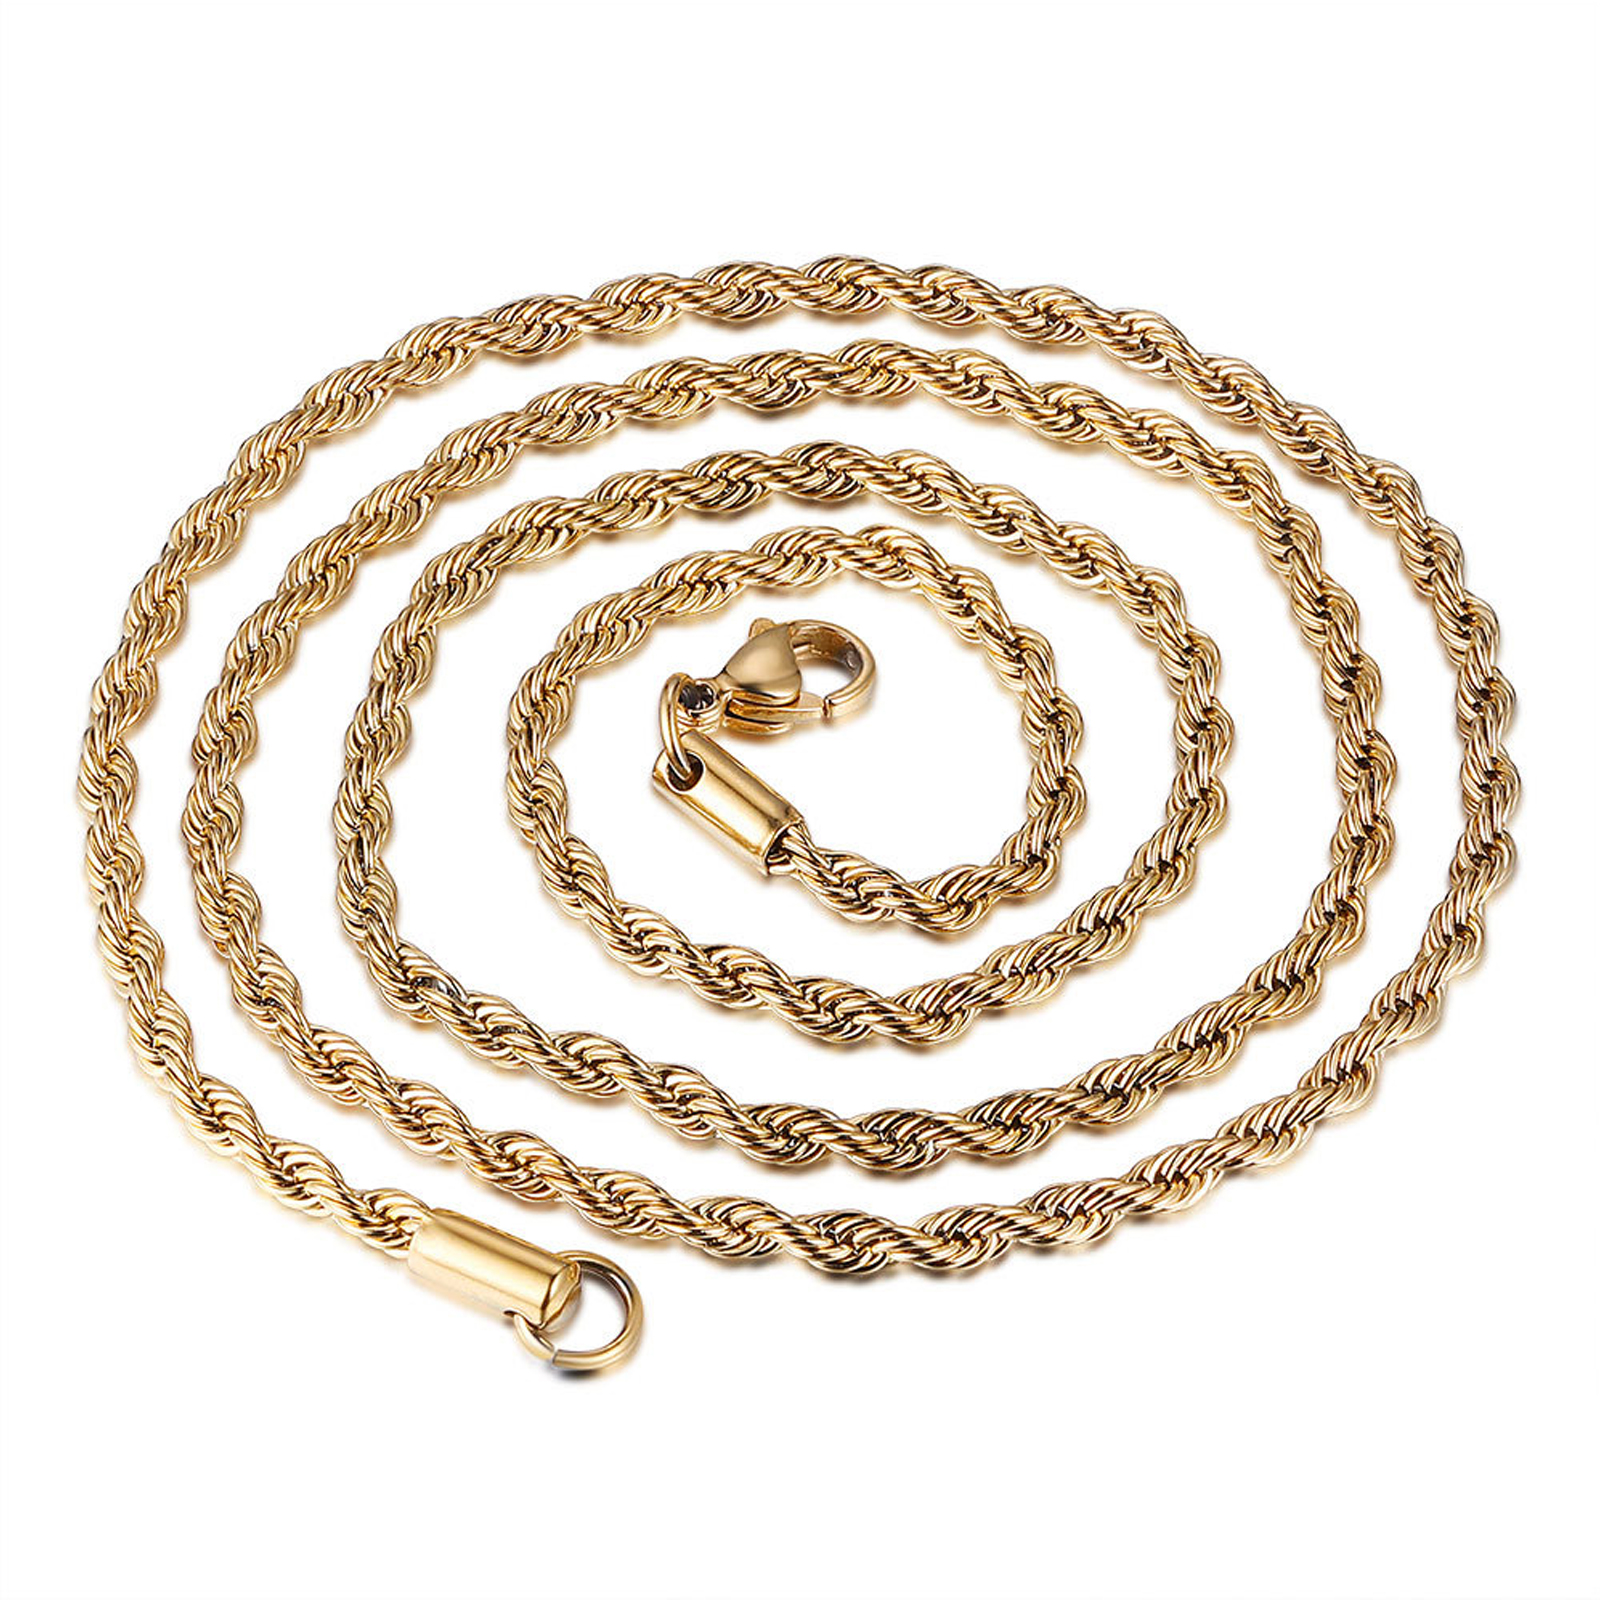 Picture of Stainless Steel Braided Rope Chain Necklace Gold Plated 41cm(16 1/8") long, 1 Piece